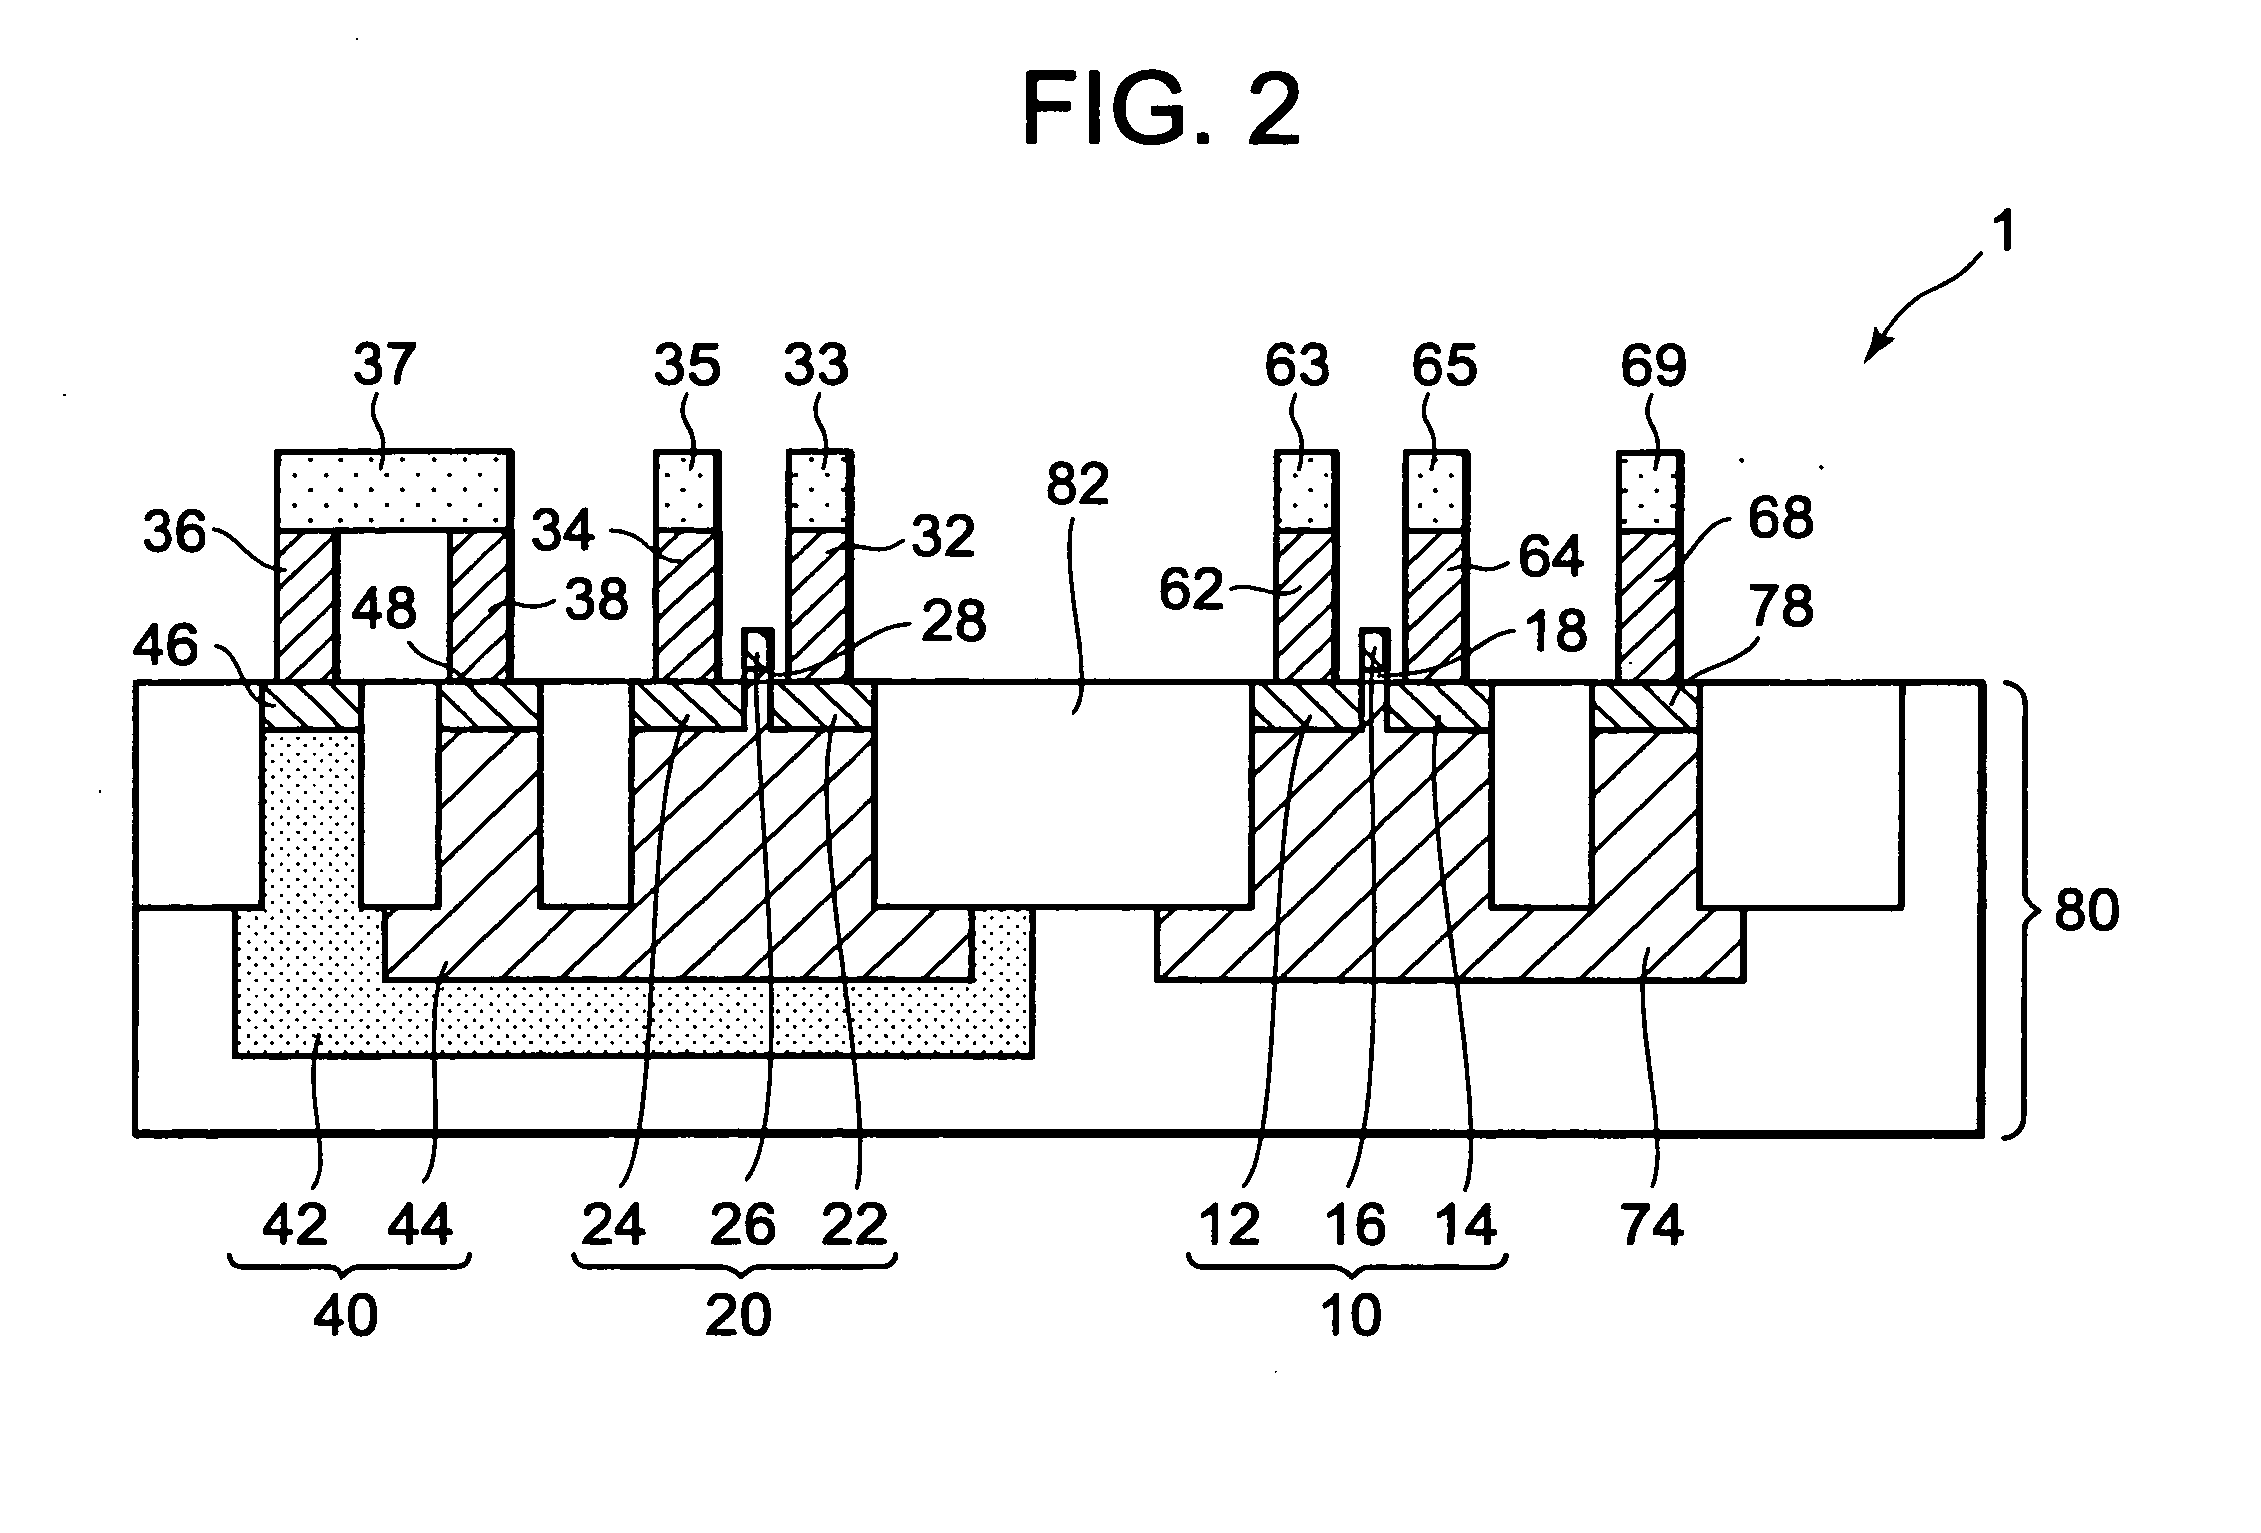 Semiconductor memory device, method of writing data therein, and method of reading data therefrom